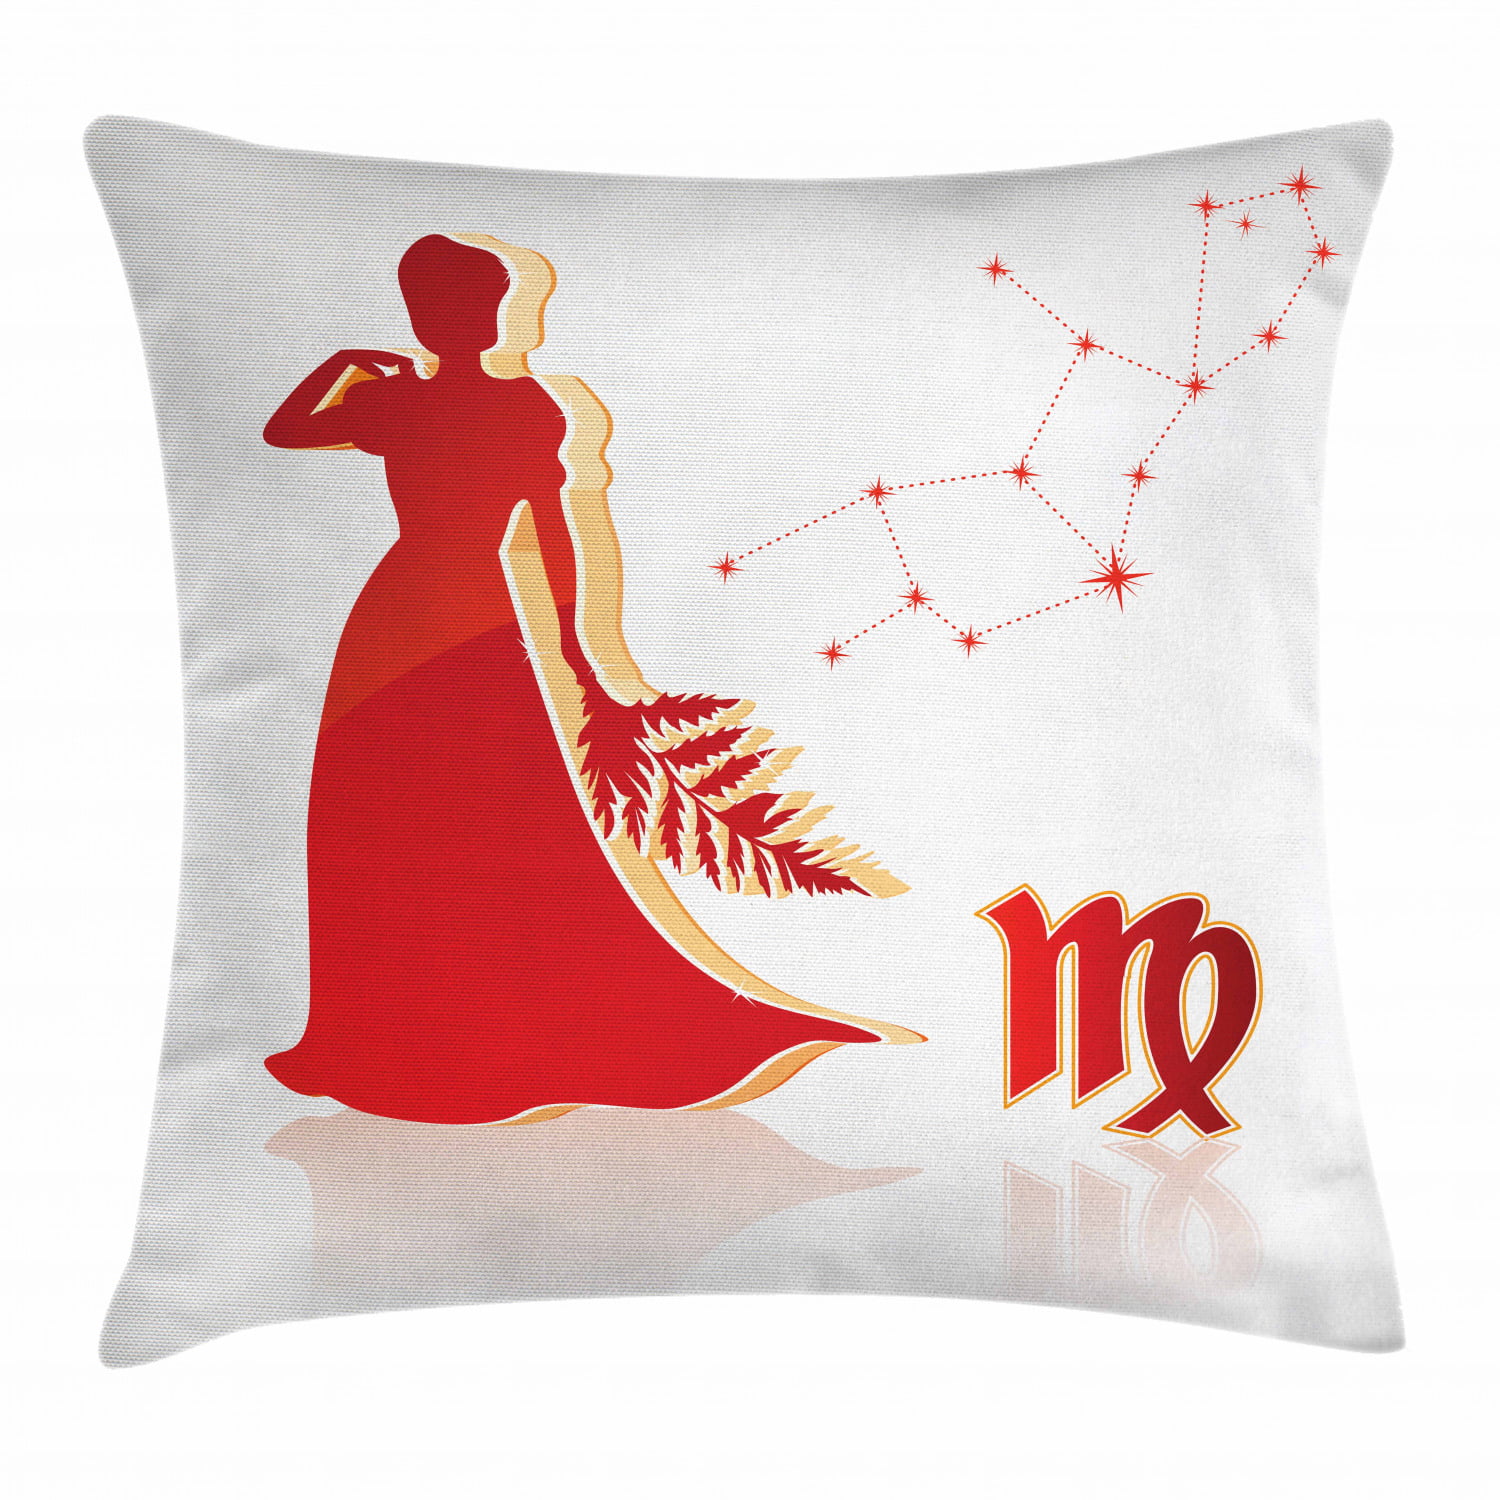 Pin Up Girl carousel Cushion Covers Pillow Cases Home Decor or Inner 